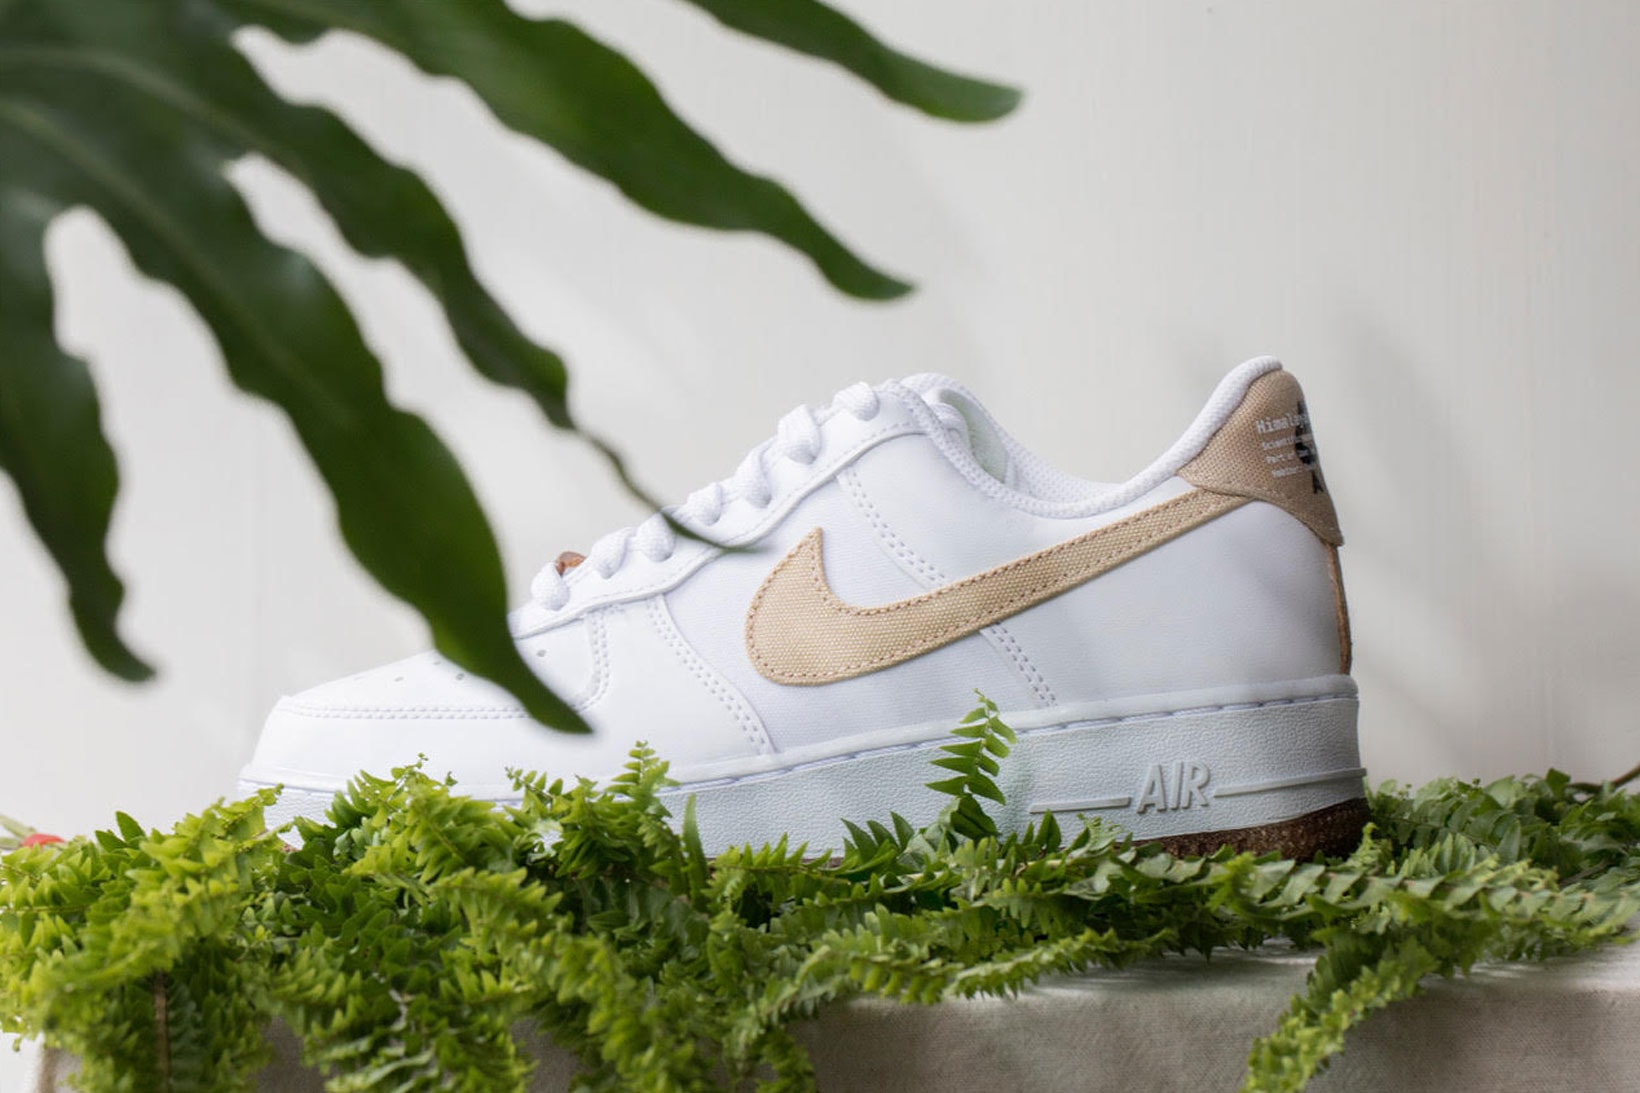 nike air force 1 af1 himalayan rhubarb plant dye sustainable sneakers laterals details swoosh cork